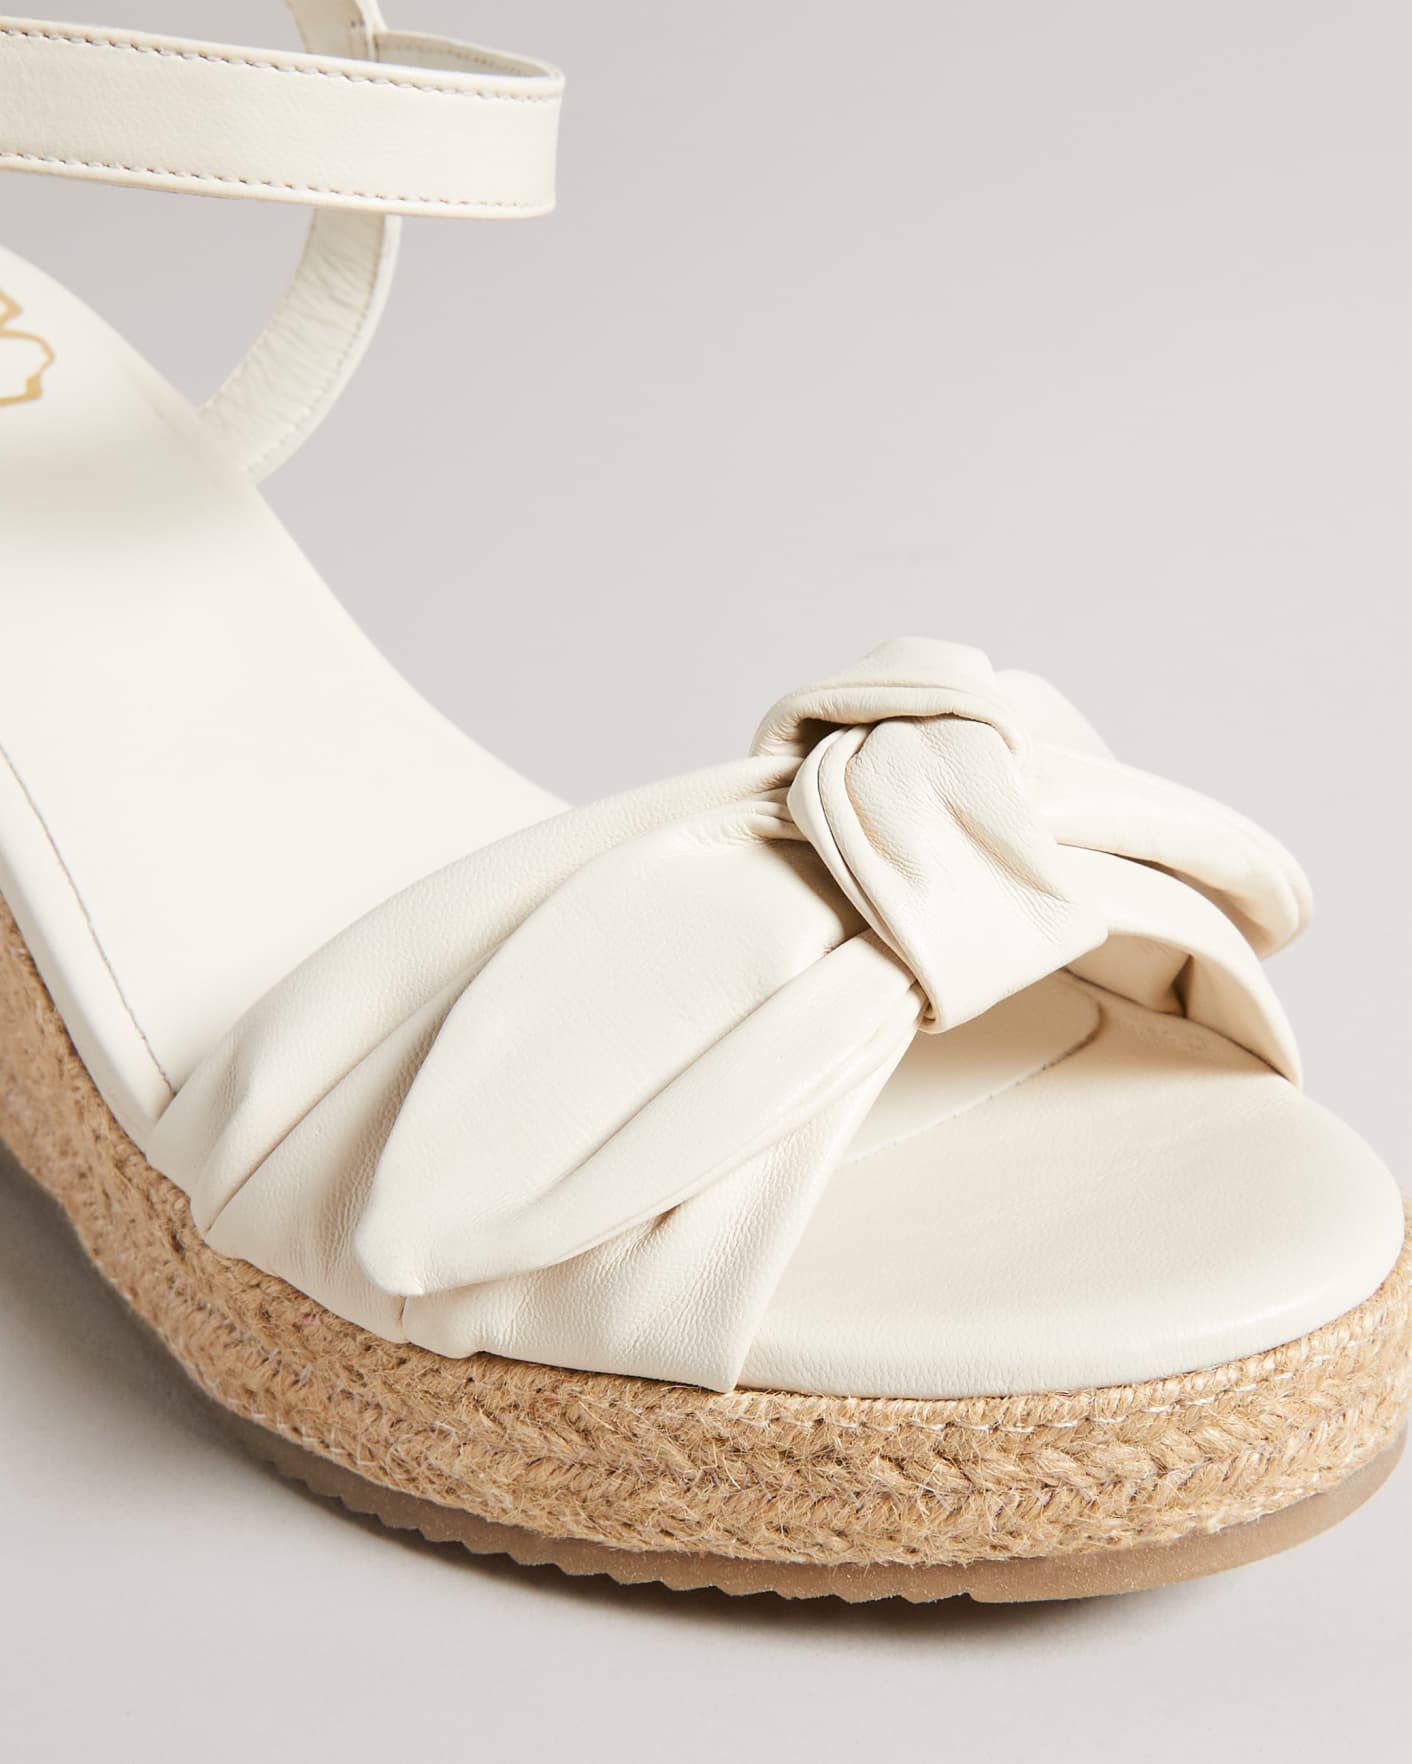 Natural Leather Bow Wedged Sandal Ted Baker